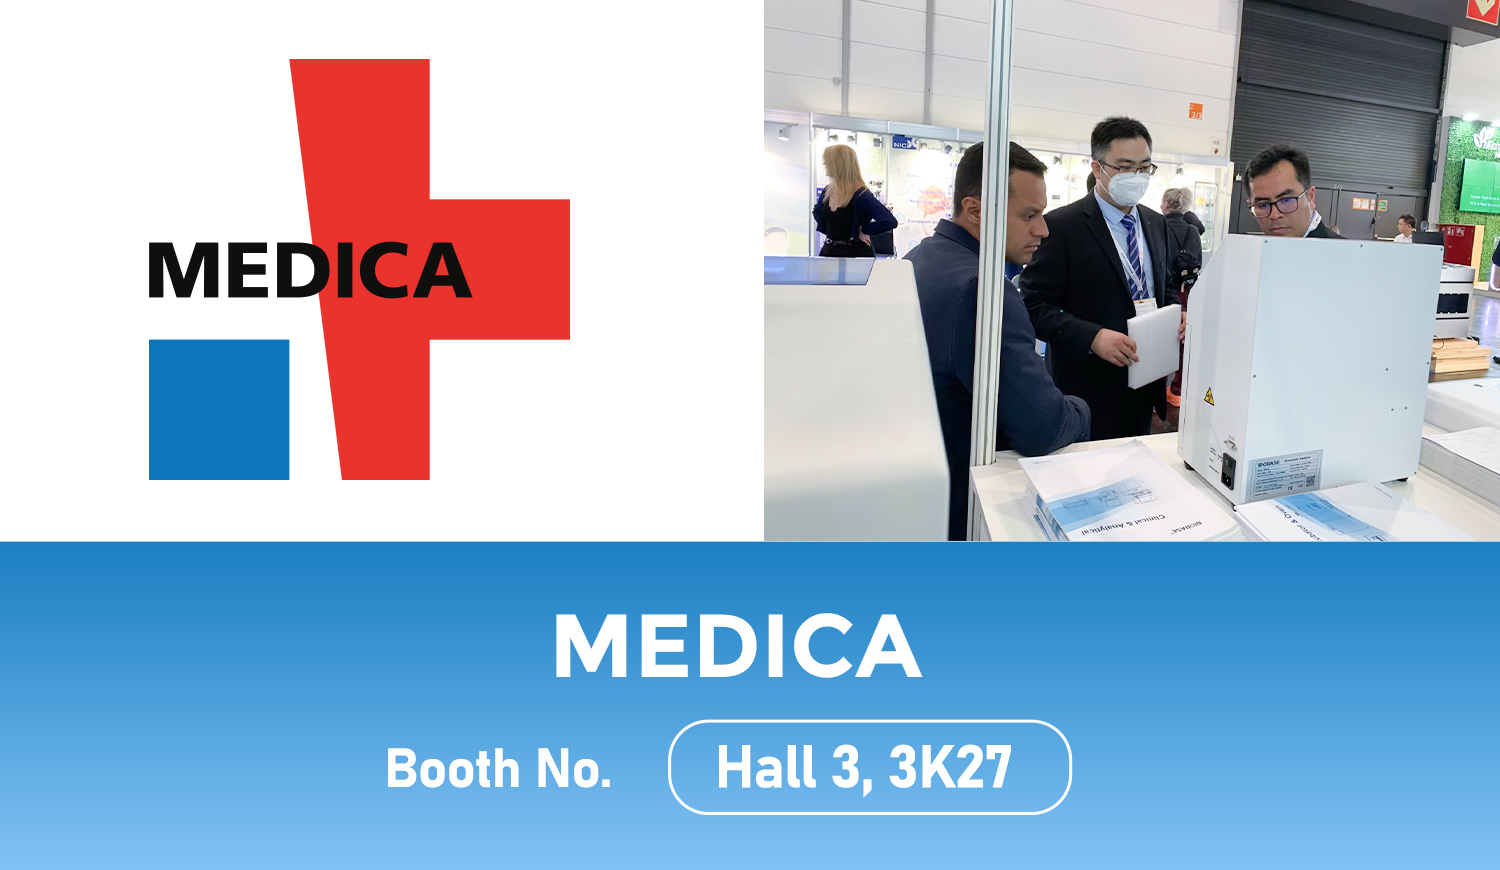 The MEDICA exhibition begins! Come and watch!